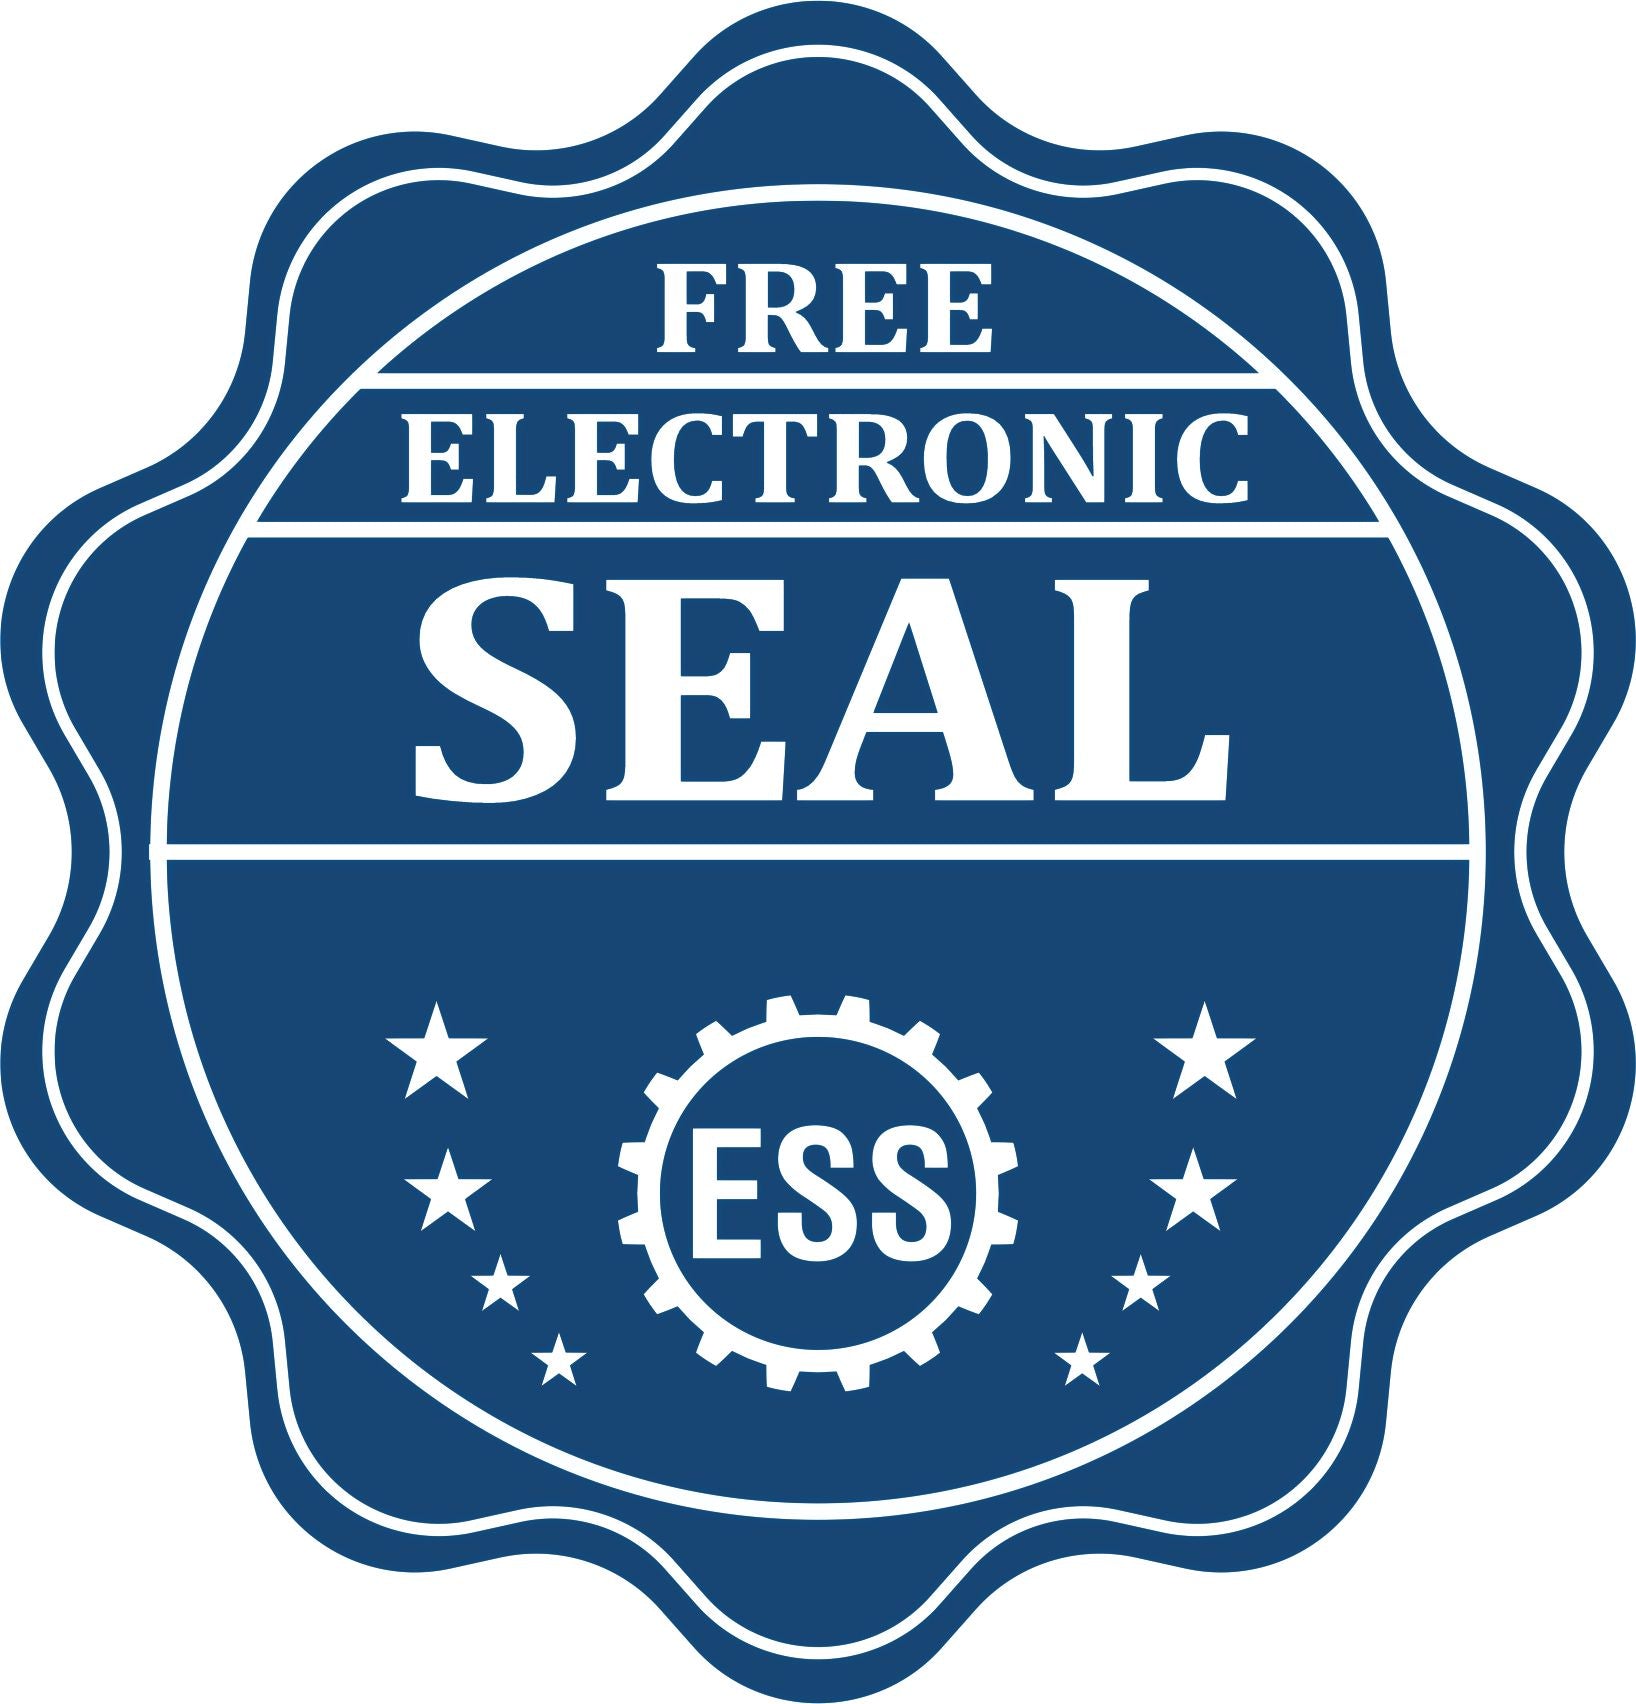 A badge showing a free electronic seal for the Soft Maryland Professional Engineer Seal with stars and the ESS gear on the emblem.